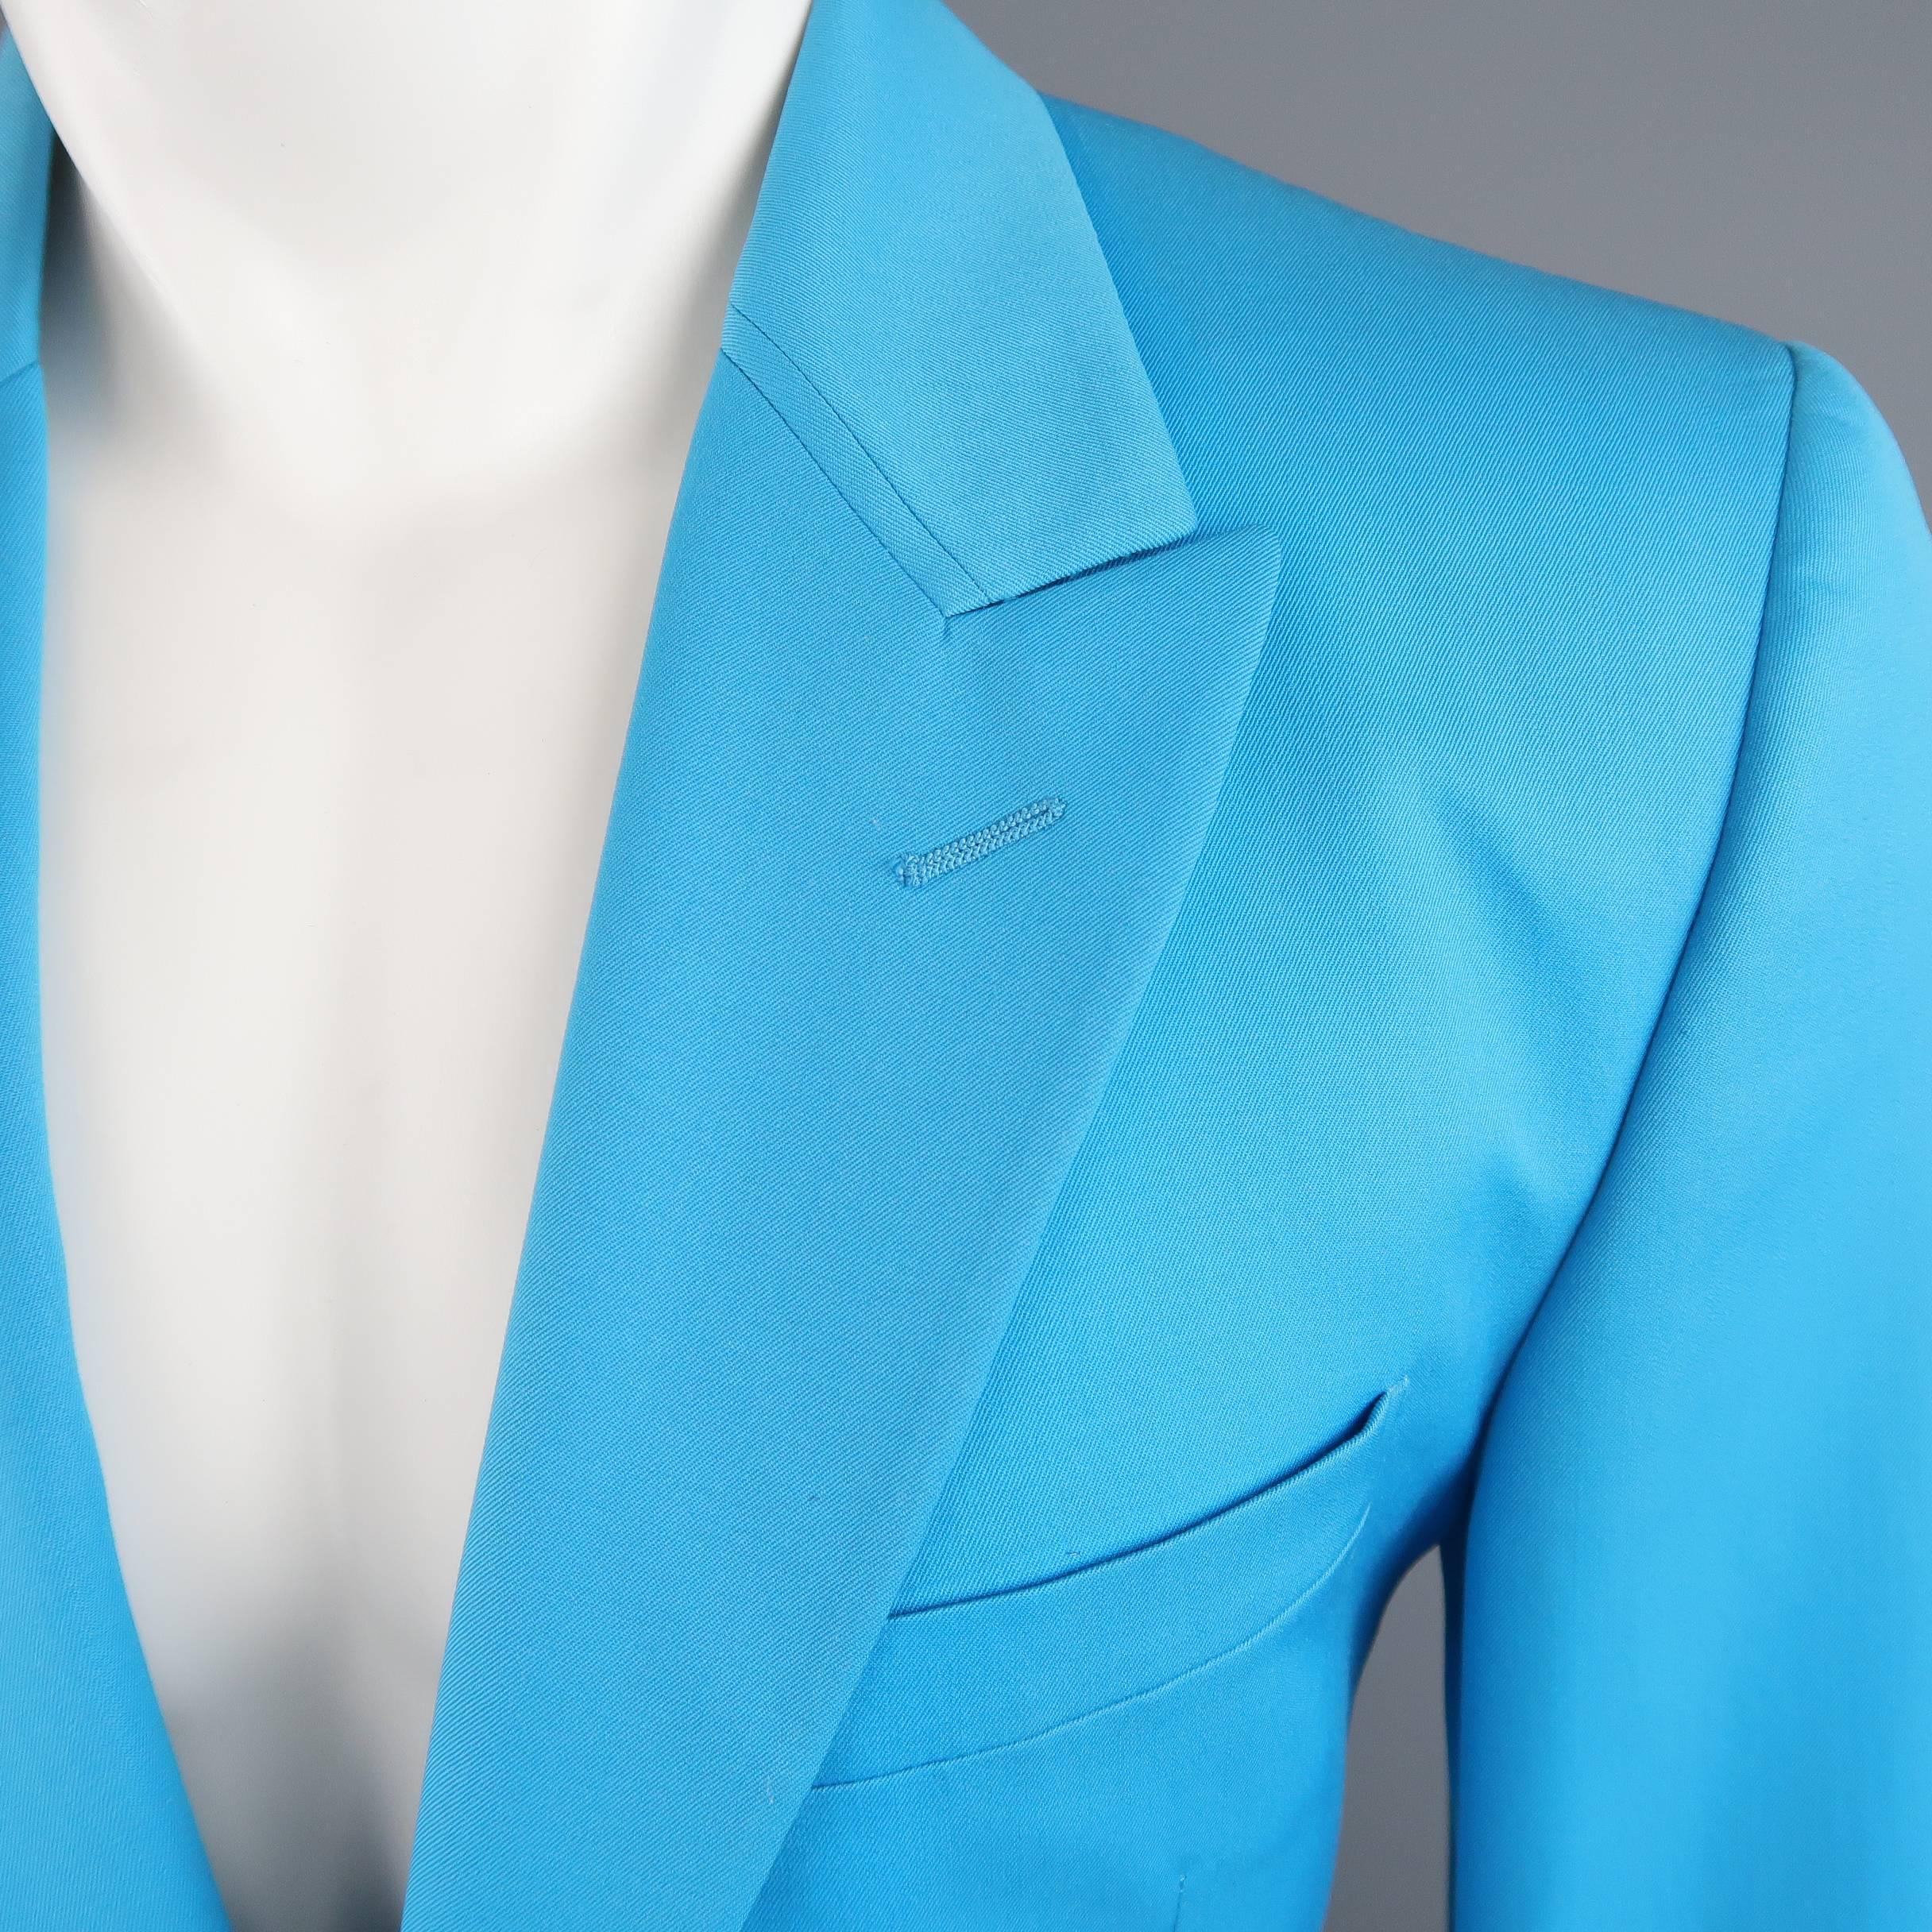 Vintage 1990's GIANNI VERSACE Couture sport coat comes in bold electric blue wool twill and features a peak lapel, single button front, flap pockets, and satin Medusa liner. Minor wear throughout fabric including spots shown in detail shots. As-Is.